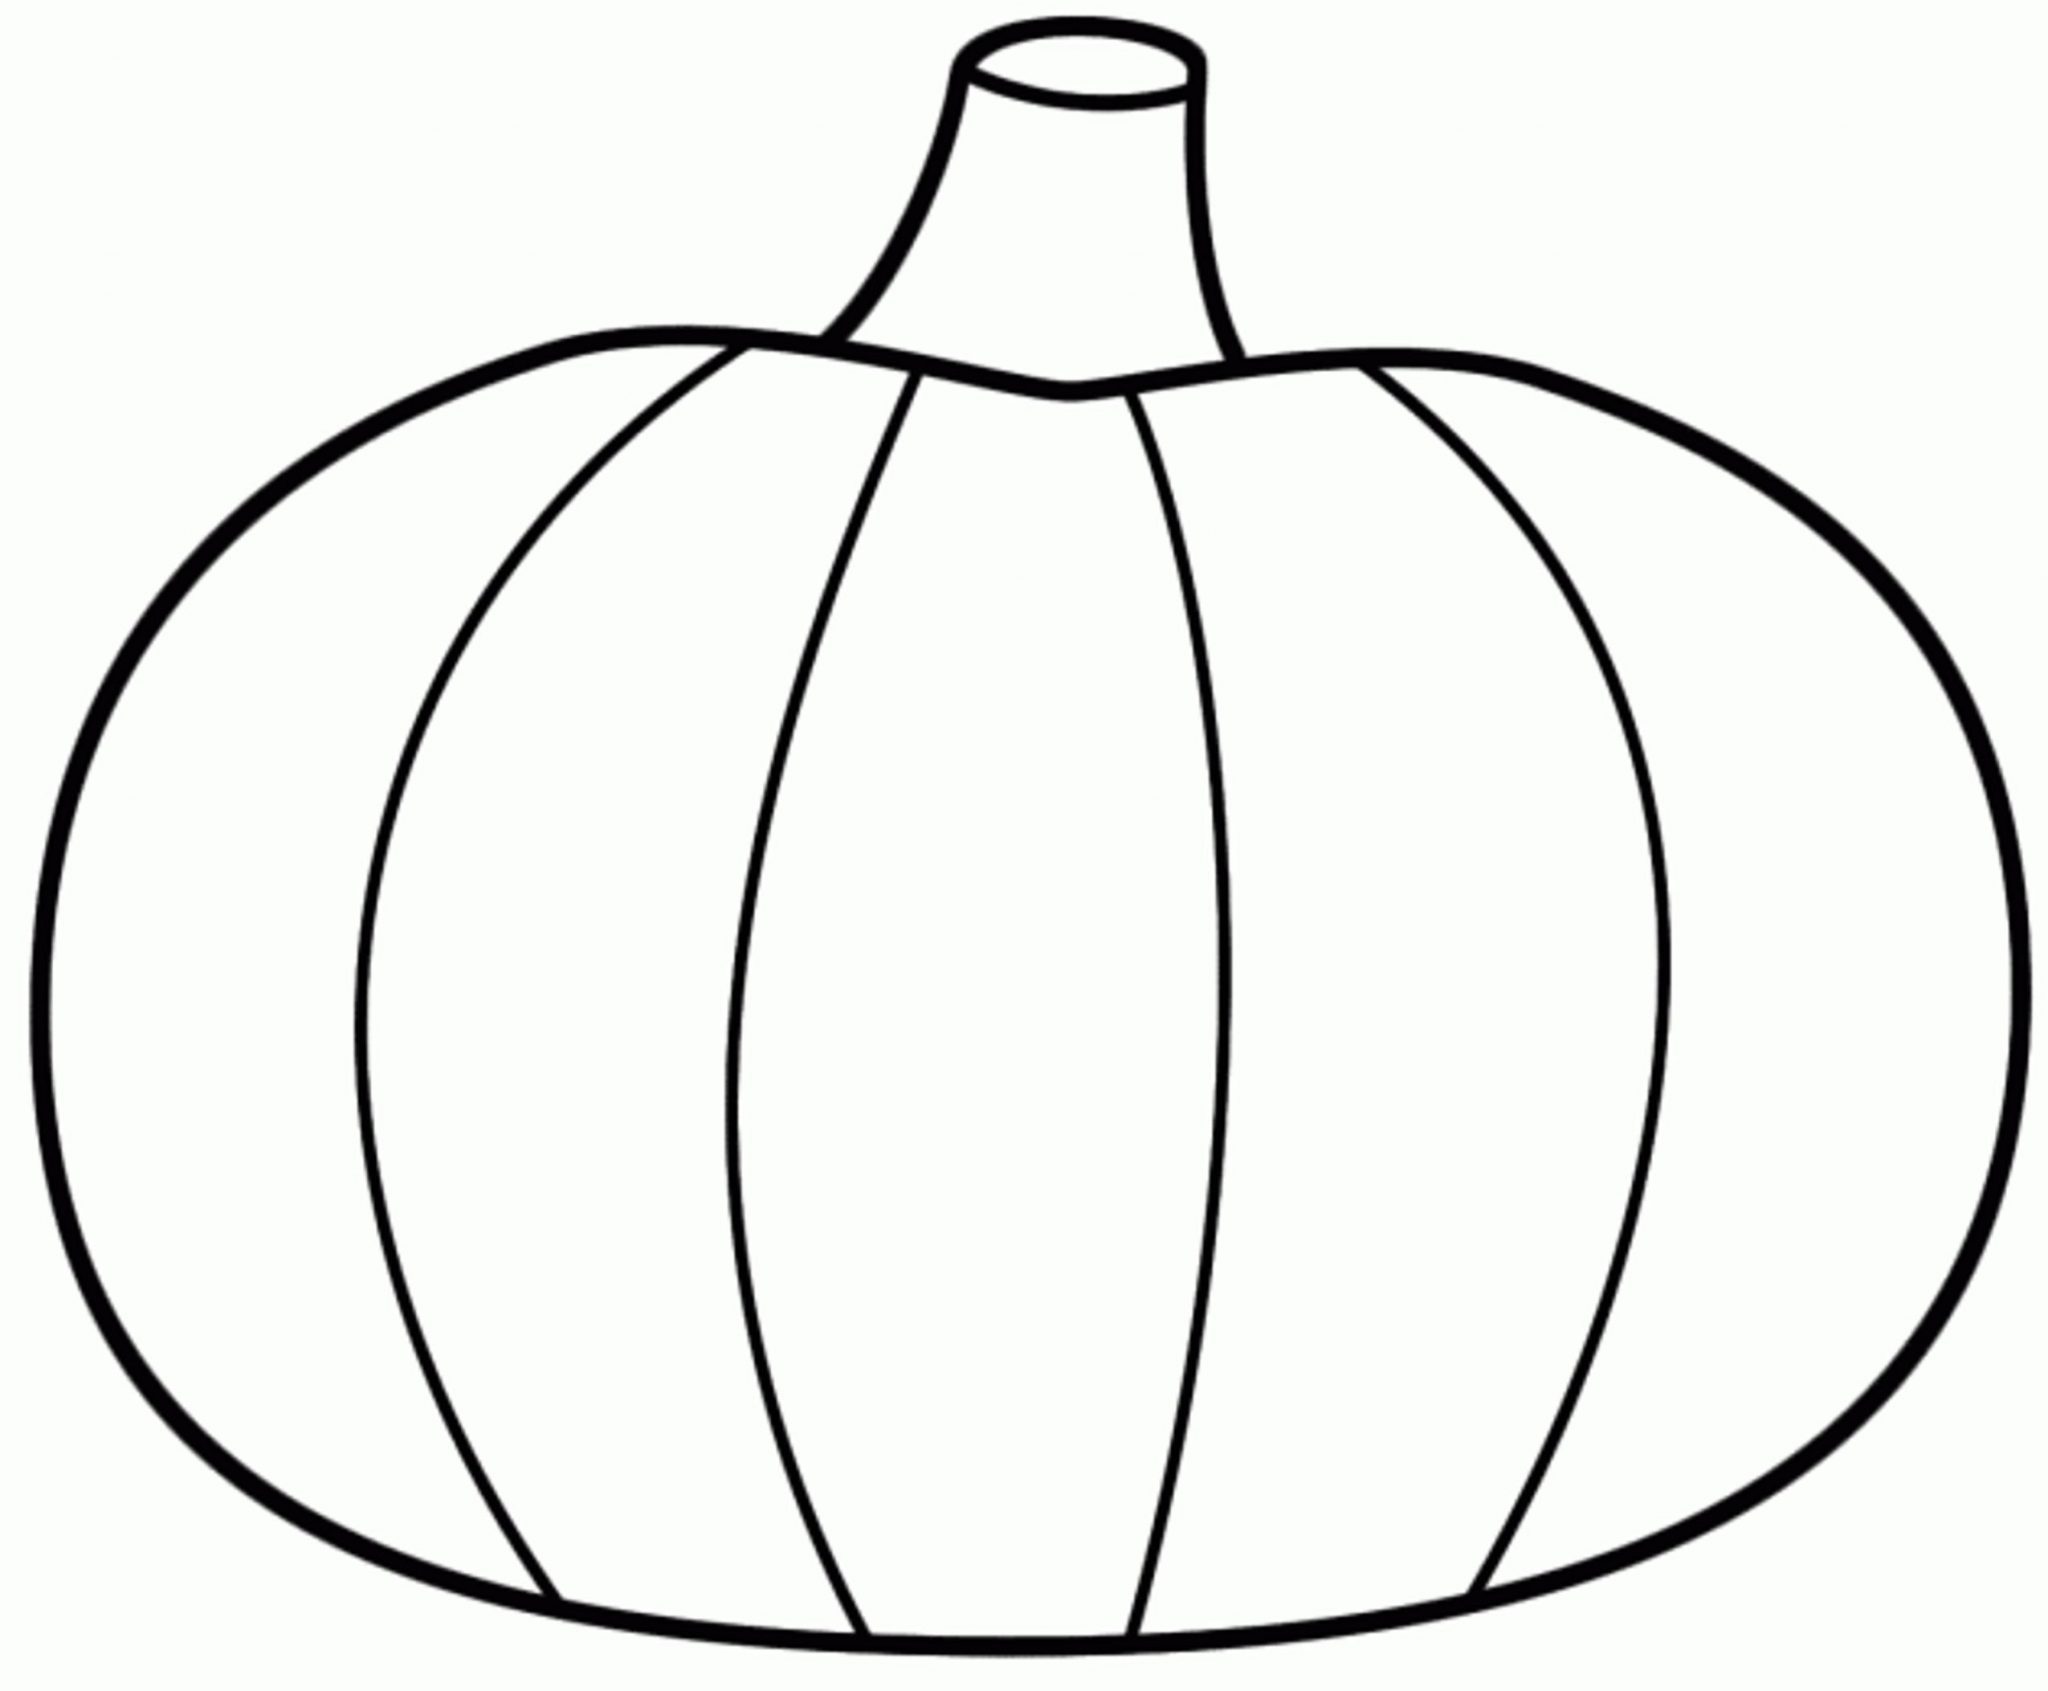 Print & Download Pumpkin Coloring Pages and Benefits of Drawing for Kids